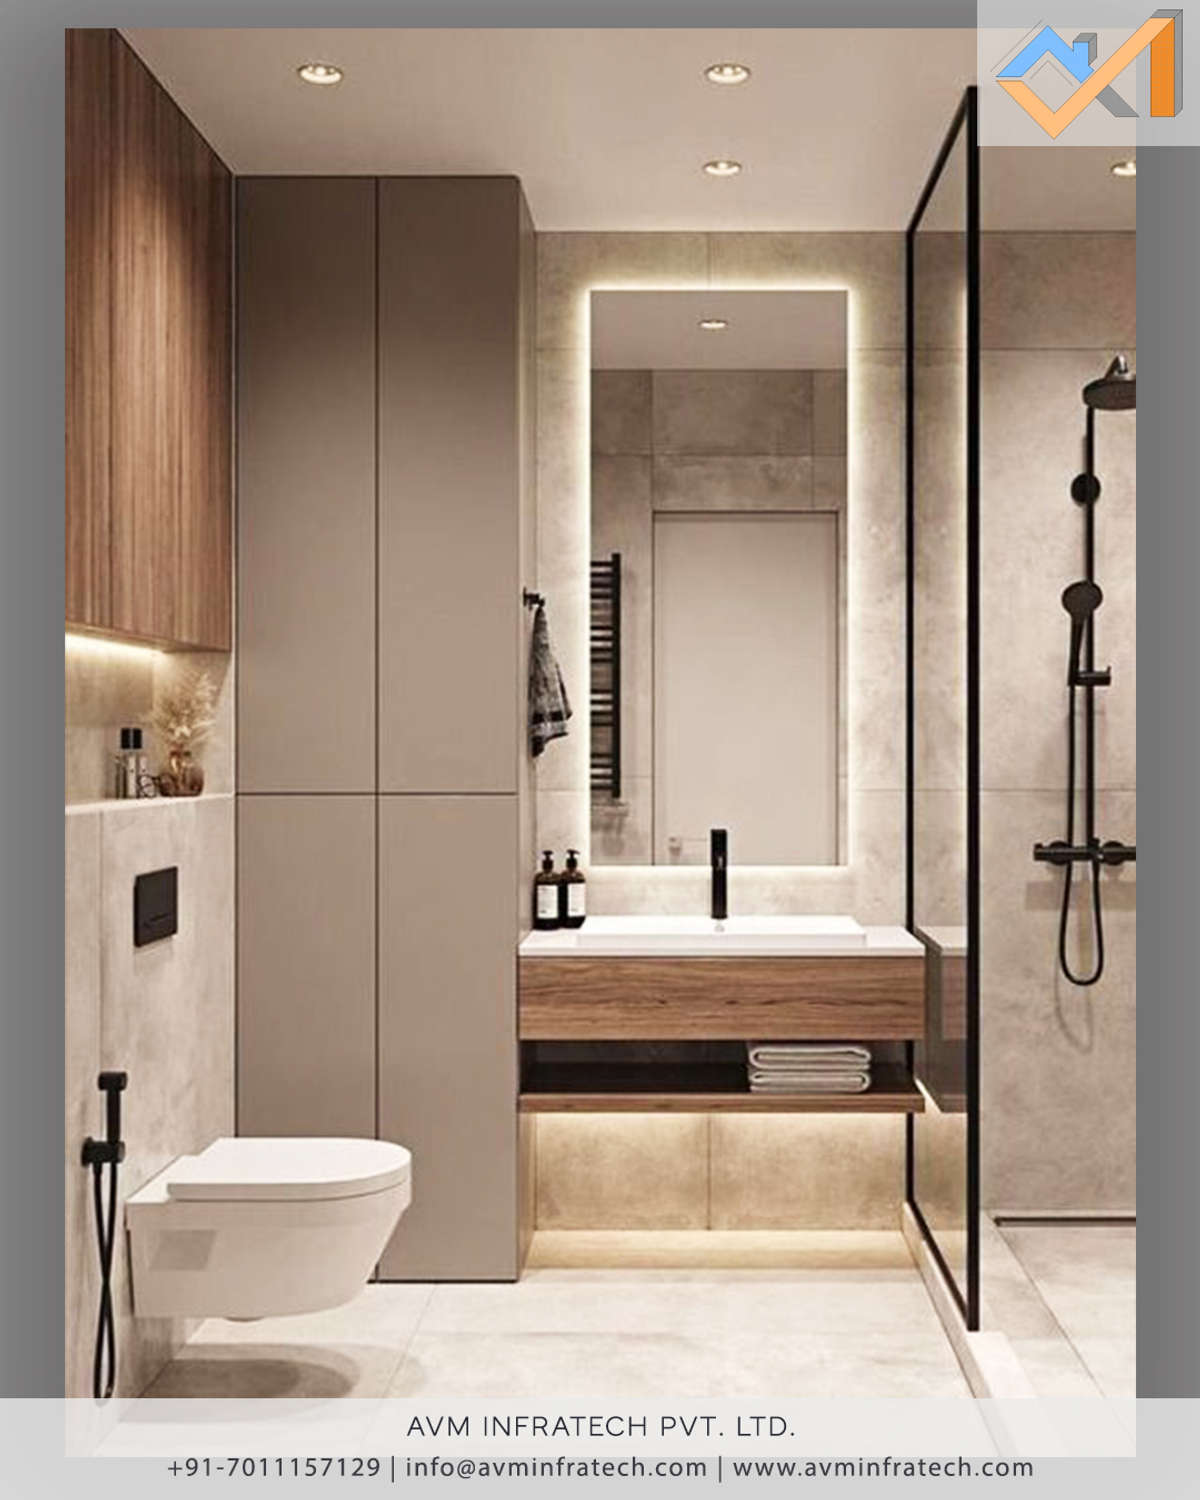 Bring harmony to a small modern bathroom by choosing materials and finishes that blend together. This creates the seamless look of a larger room. Wood tones and warm, neutral tiles create cohesion in this efficient nature-inspired bathroom design.


Follow us for more such amazing updates. 
.
.
#harmony #modern #bathroom #material #finishes #blend #seamless #large #room #wood #tones #efficient #nature #inspired #design #toilet #washroom #metal